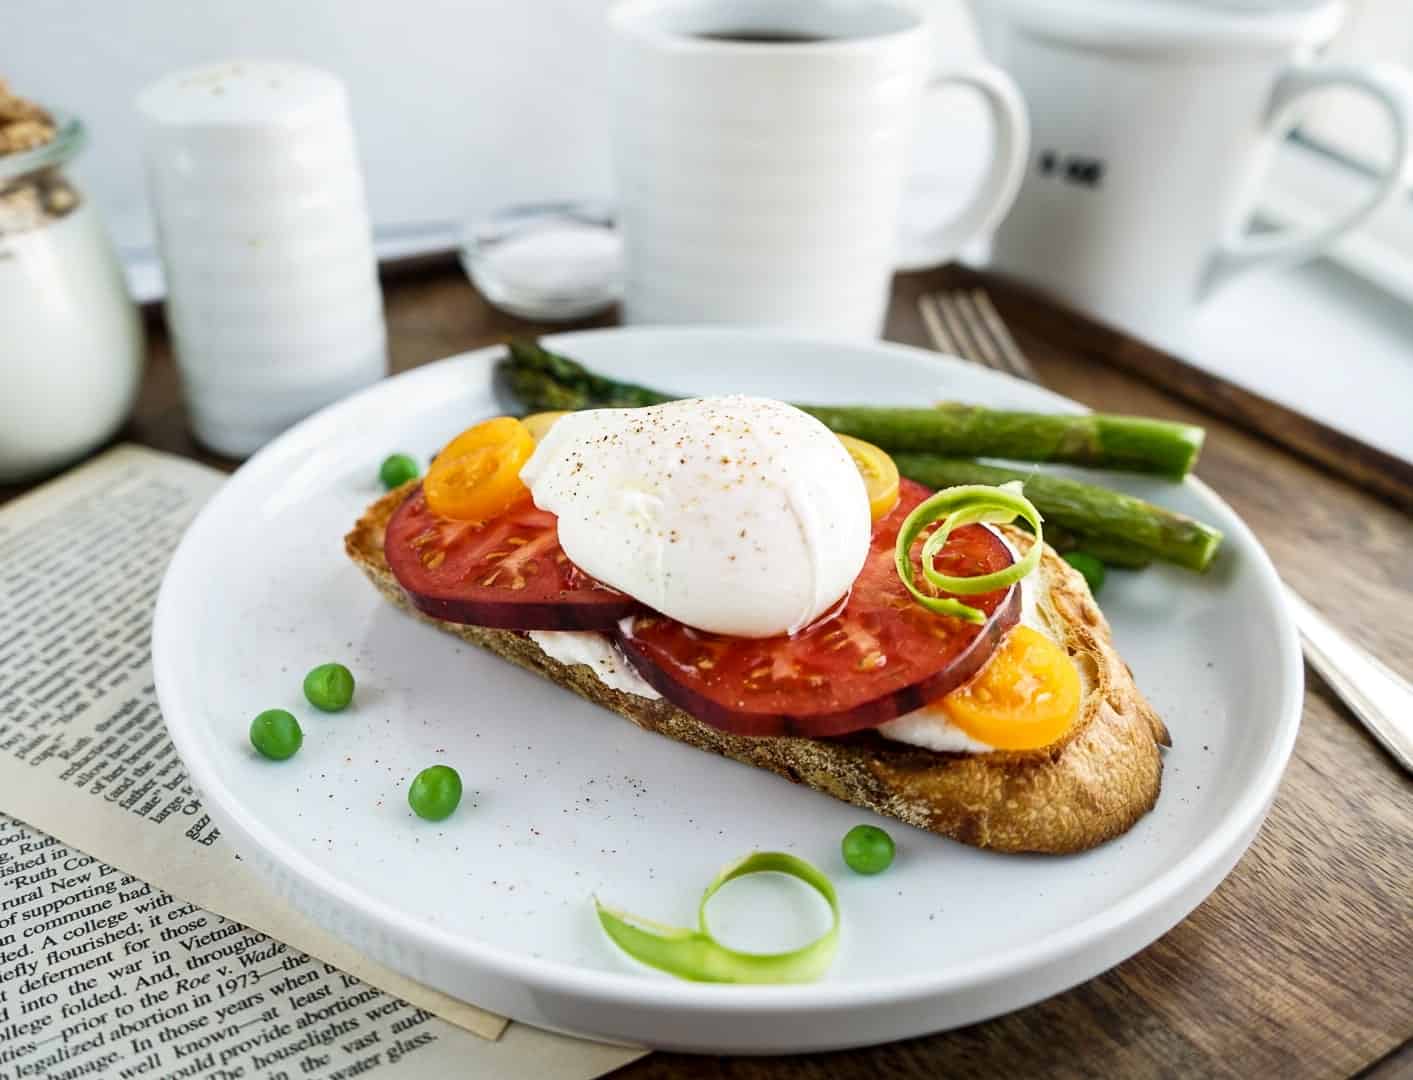 tomato toast with poached egg still in tact